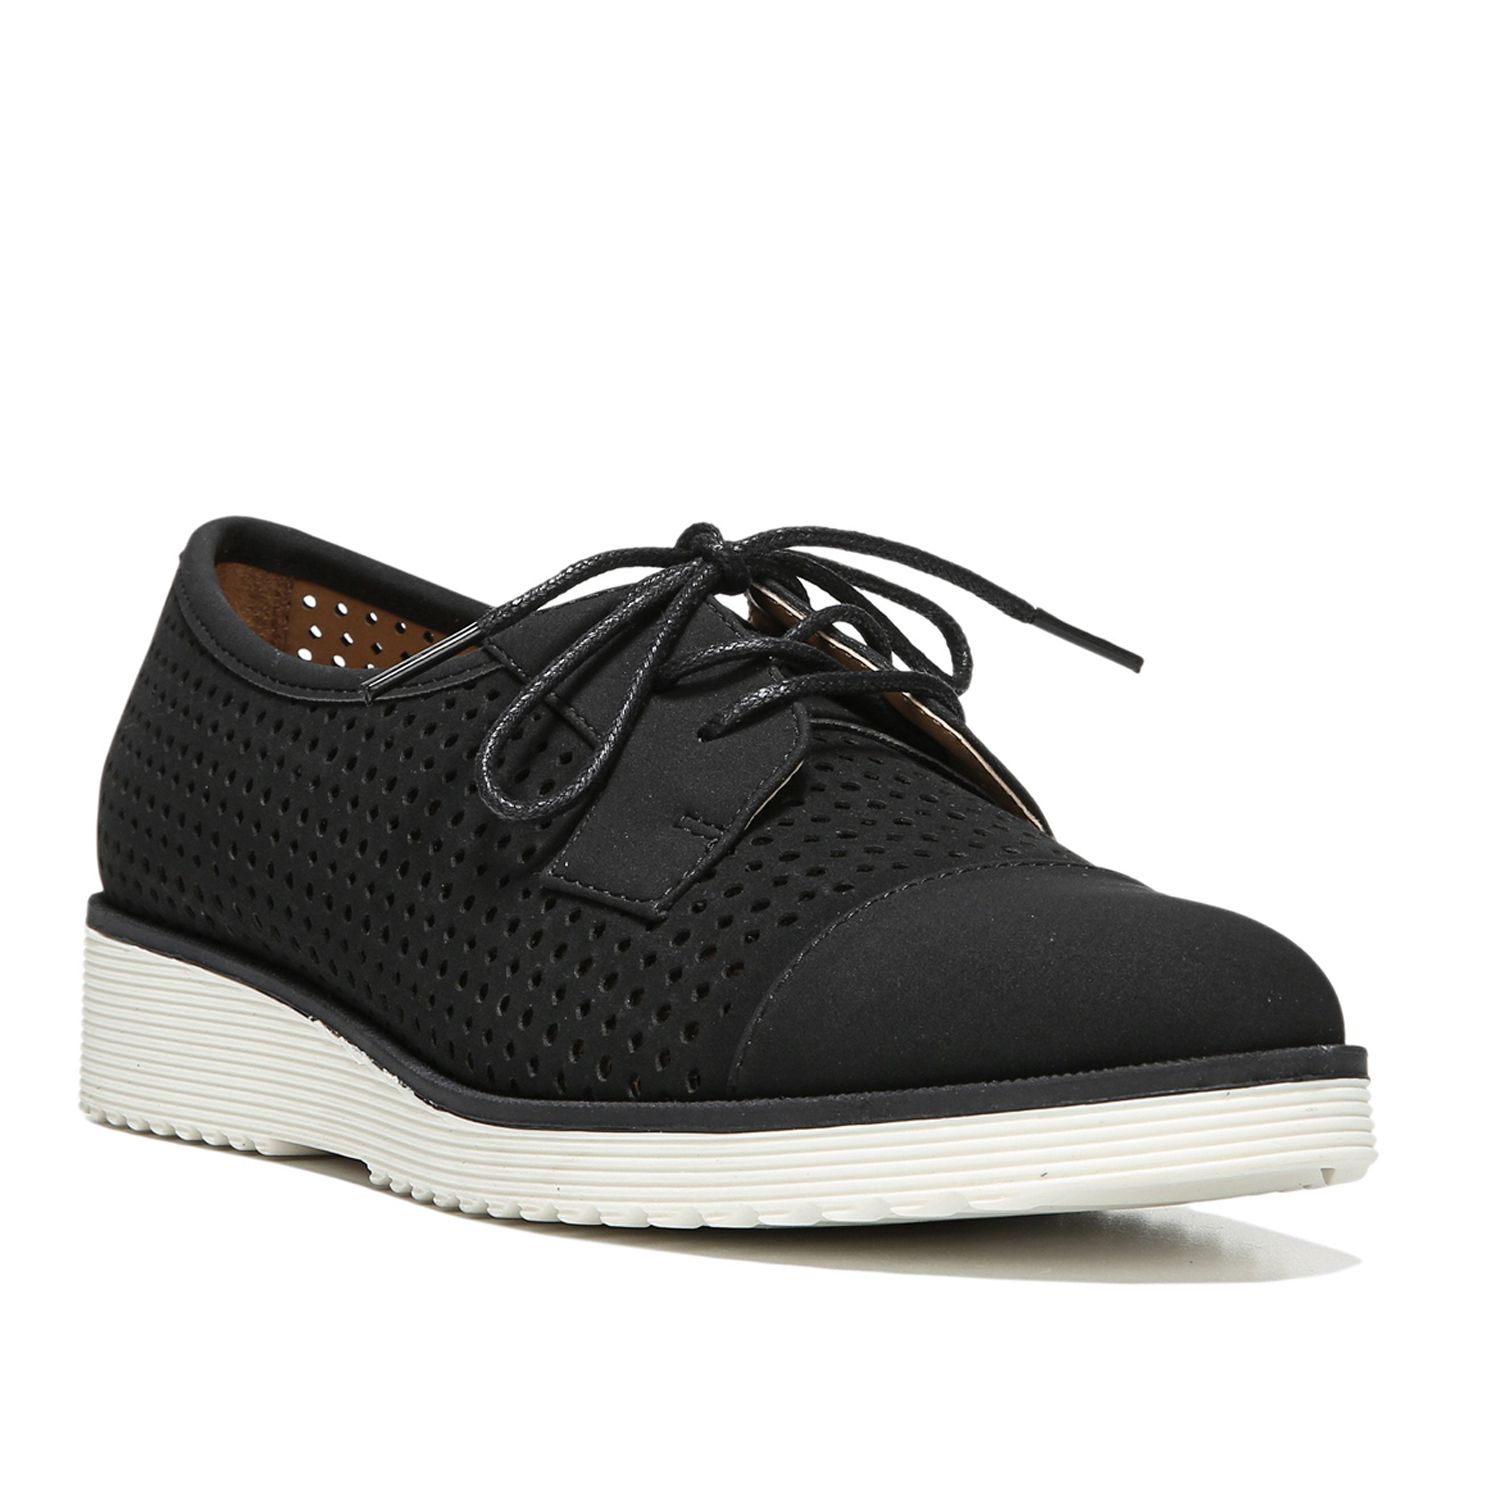 naturalizer oxford shoes